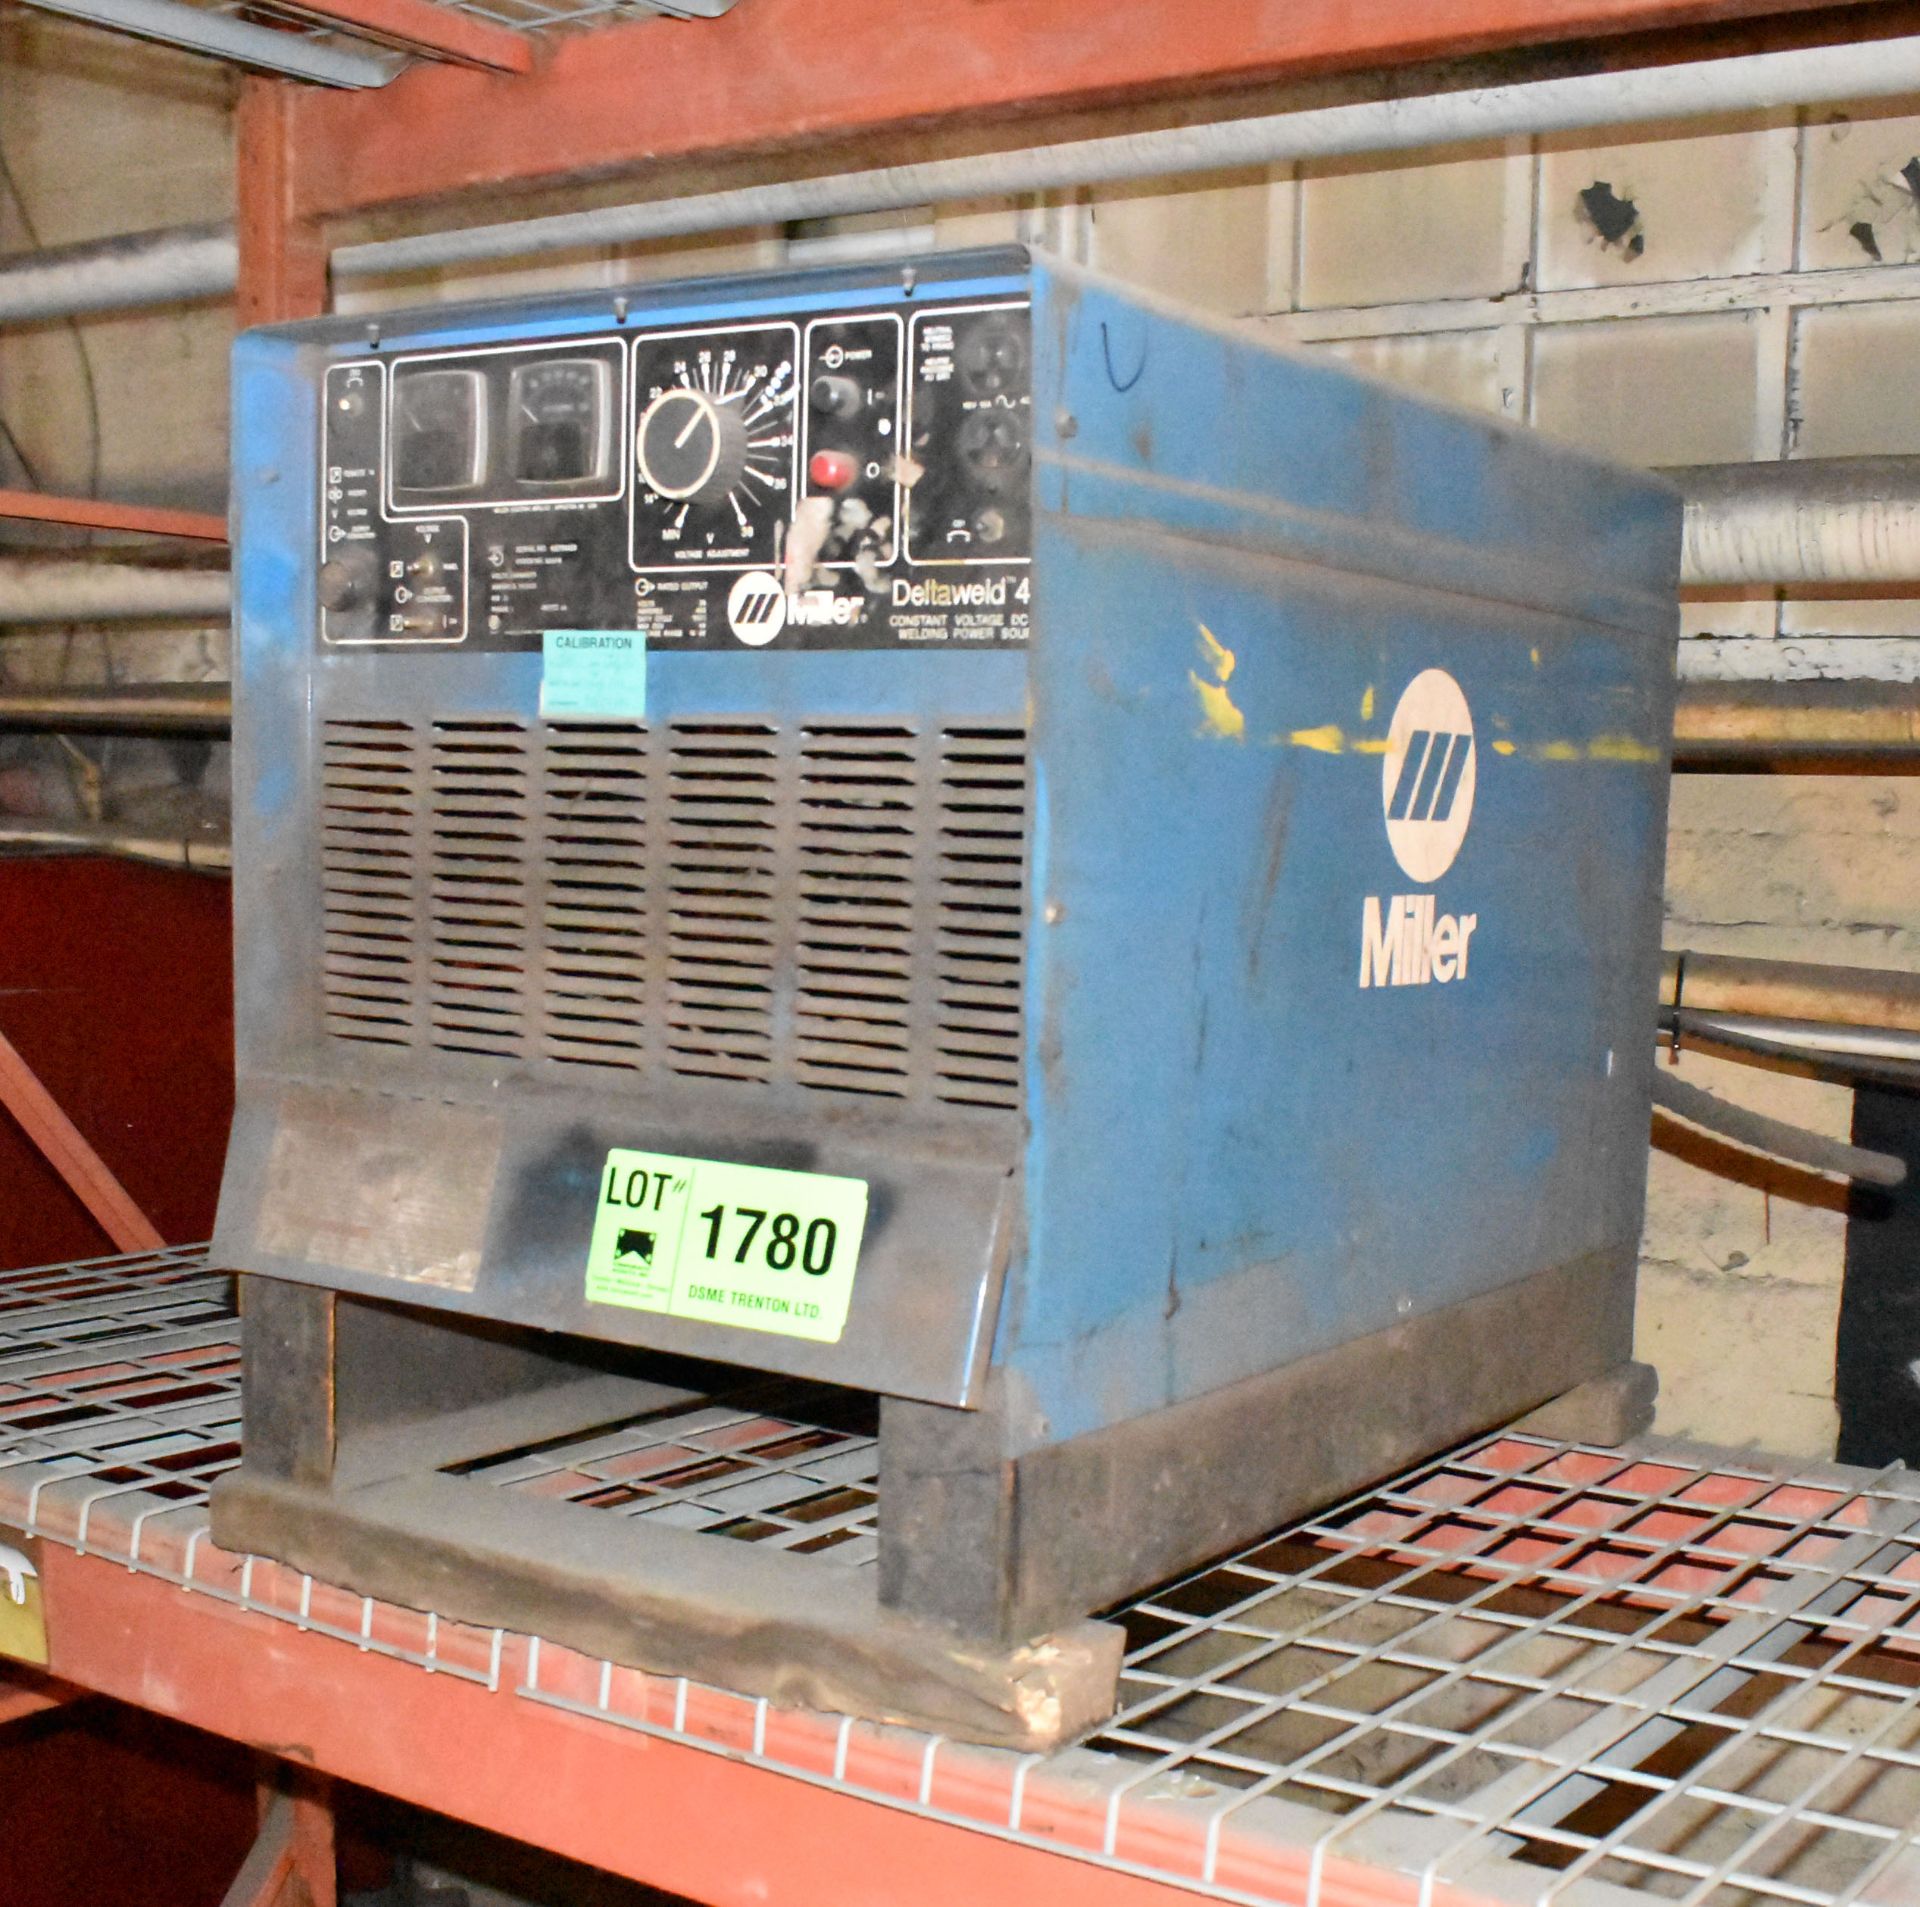 MILLER DELTAWELD 451 WELDING POWER SOURCE [RIGGING FEE FOR LOT# 1780 - $40 USD +PLUS TAXES]